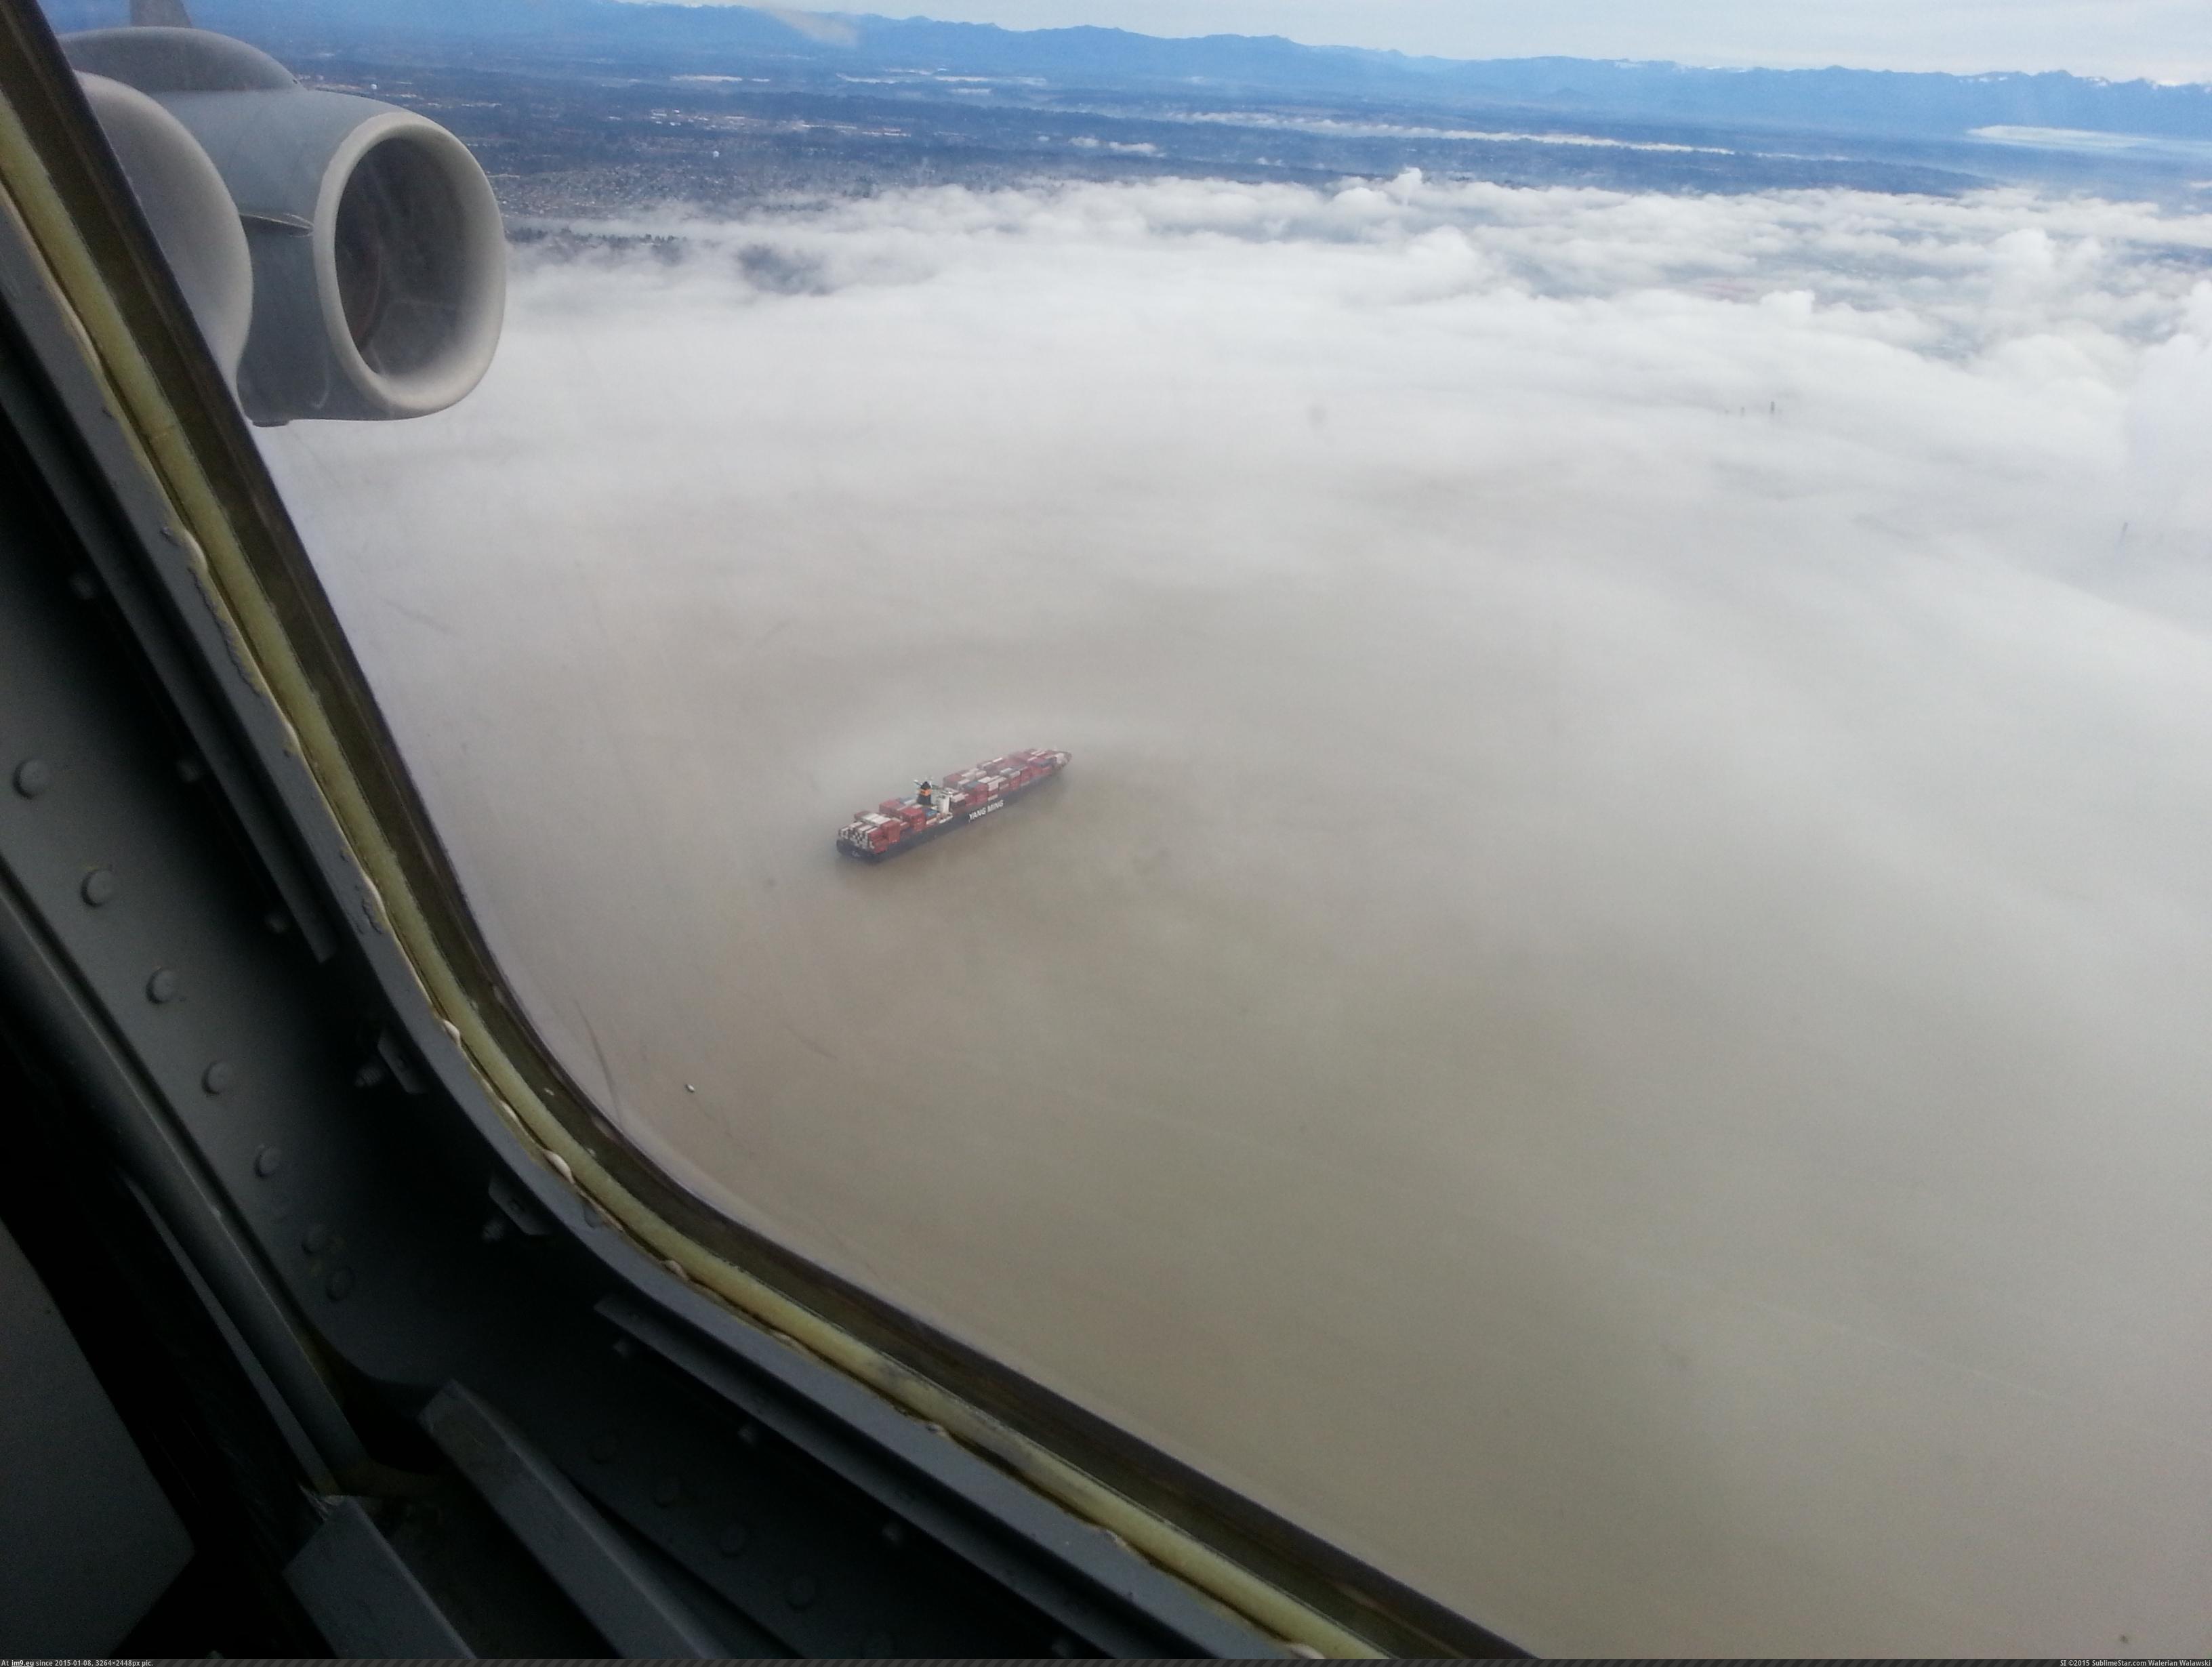 [Pics] This ship looked like it was floating on a cloud today. (in My r/PICS favs)